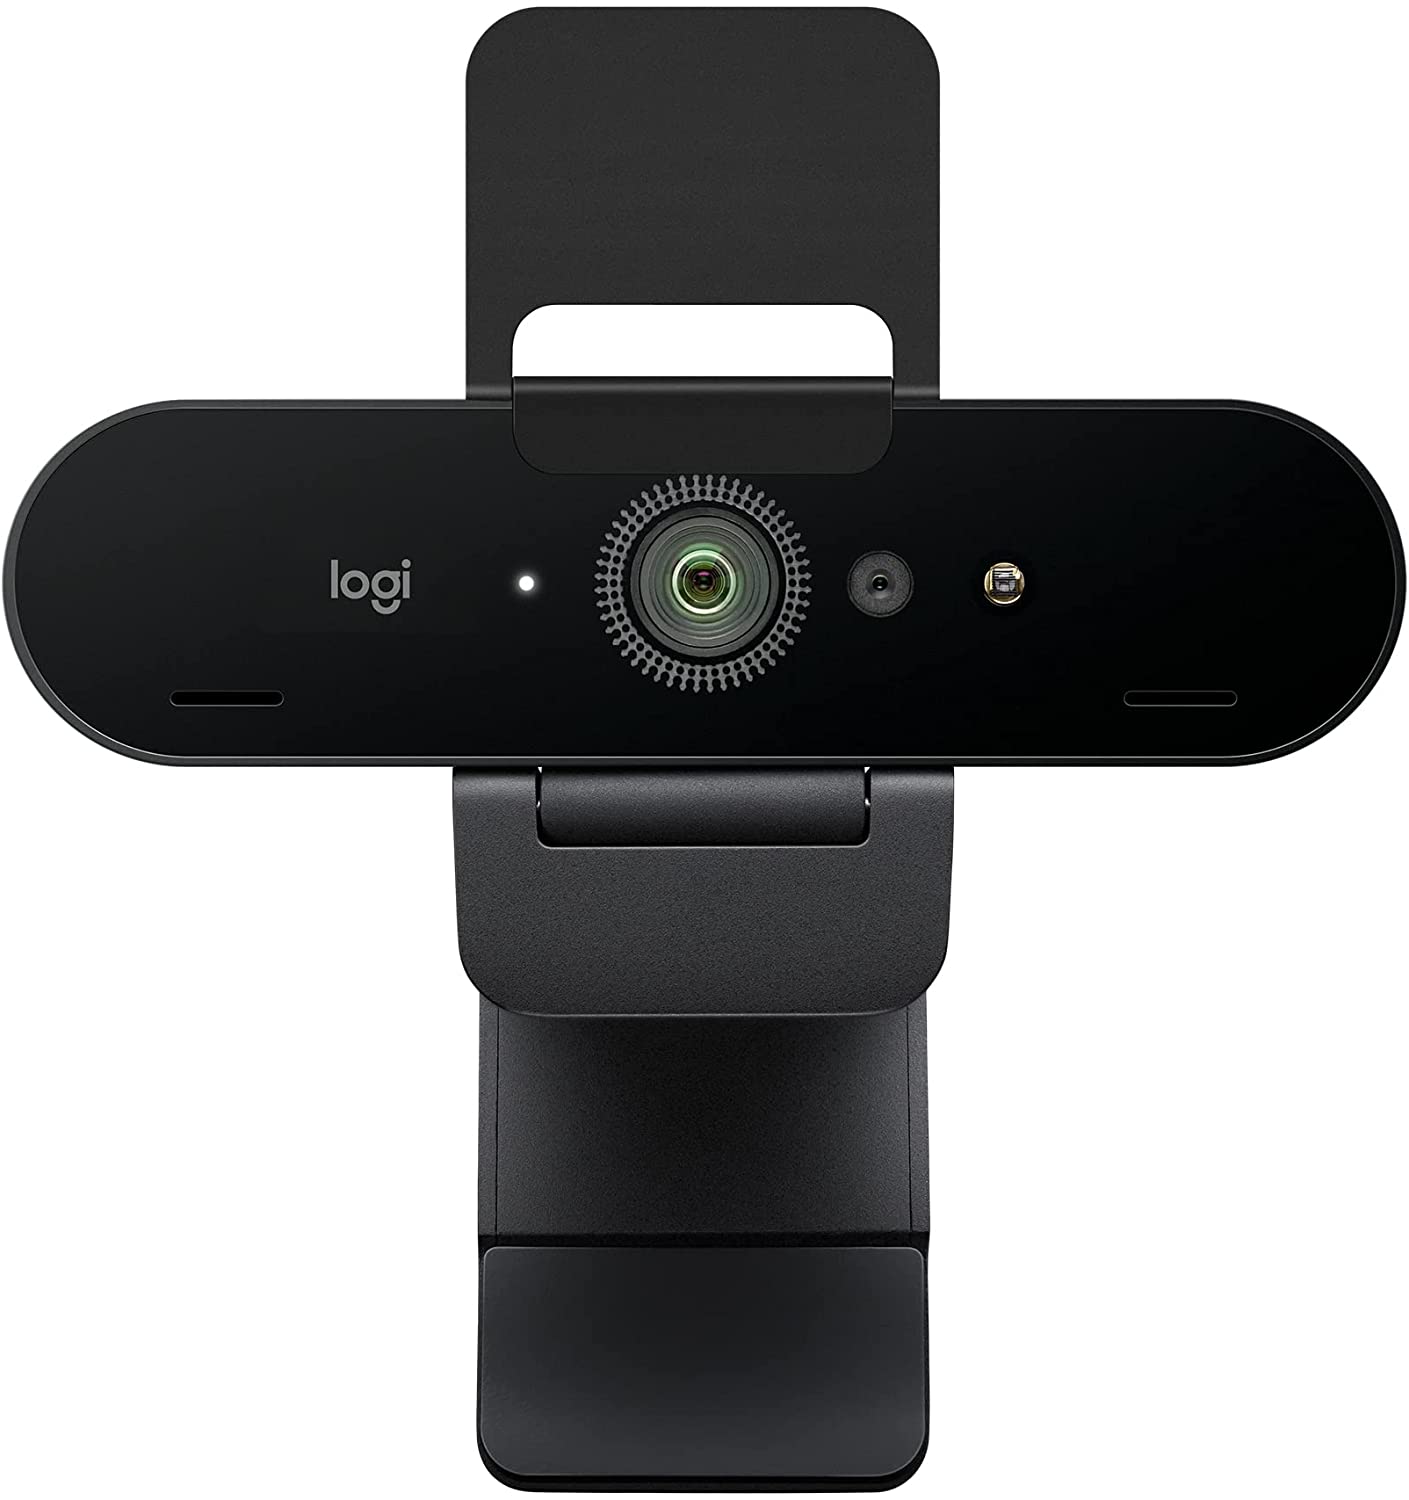 Logitech Brio 4K webcam sold and shipped by Amazon $148.49